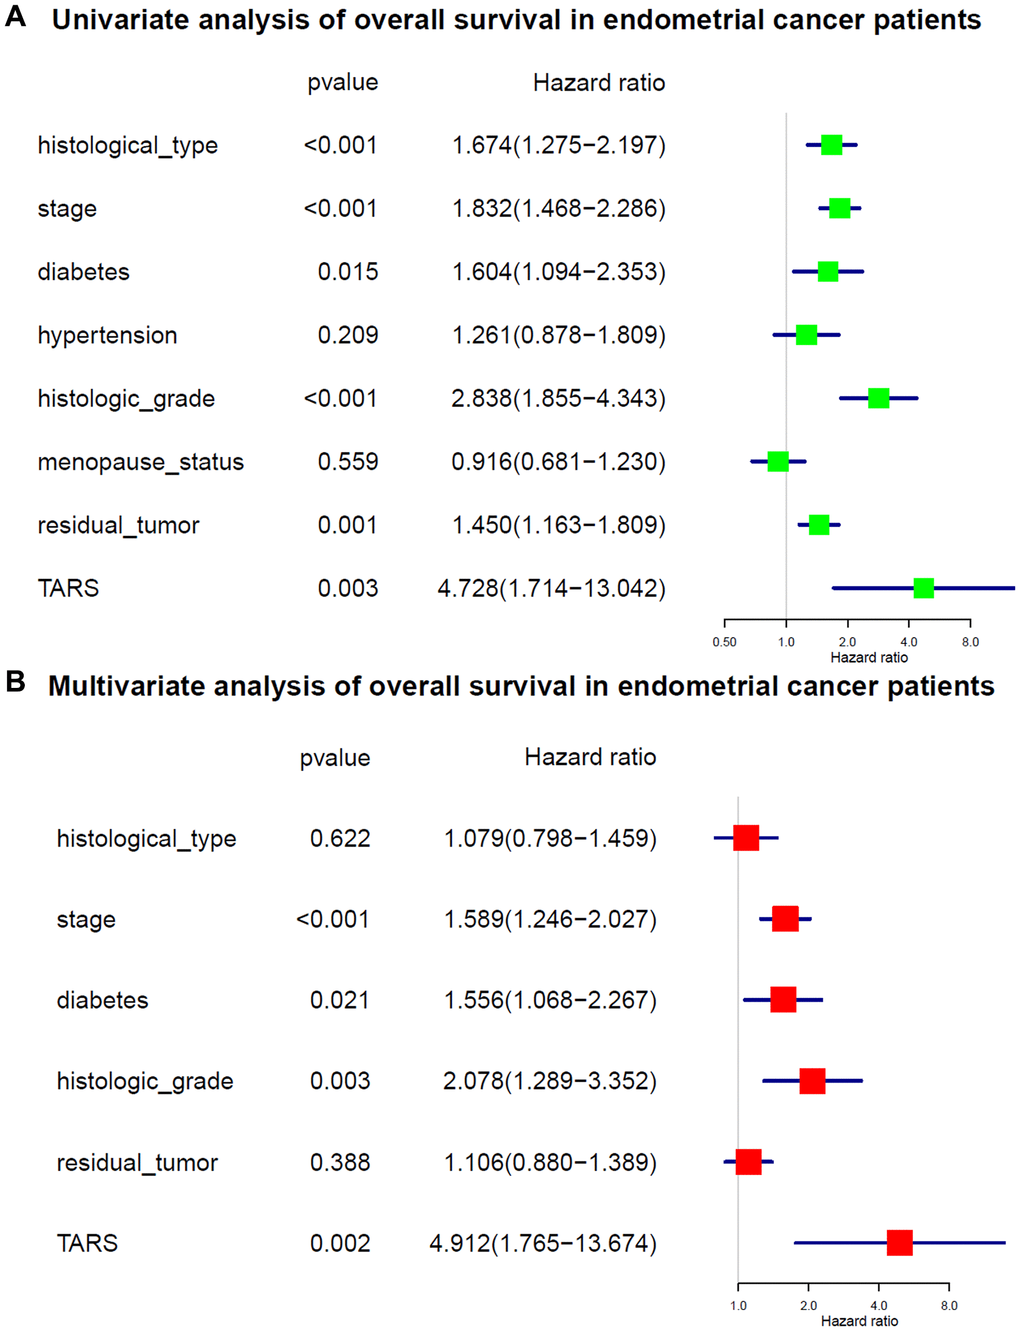 Cox analysis of overall survival. (A) Univariate analysis of overall survival. (B) Multivariate analysis of overall survival.